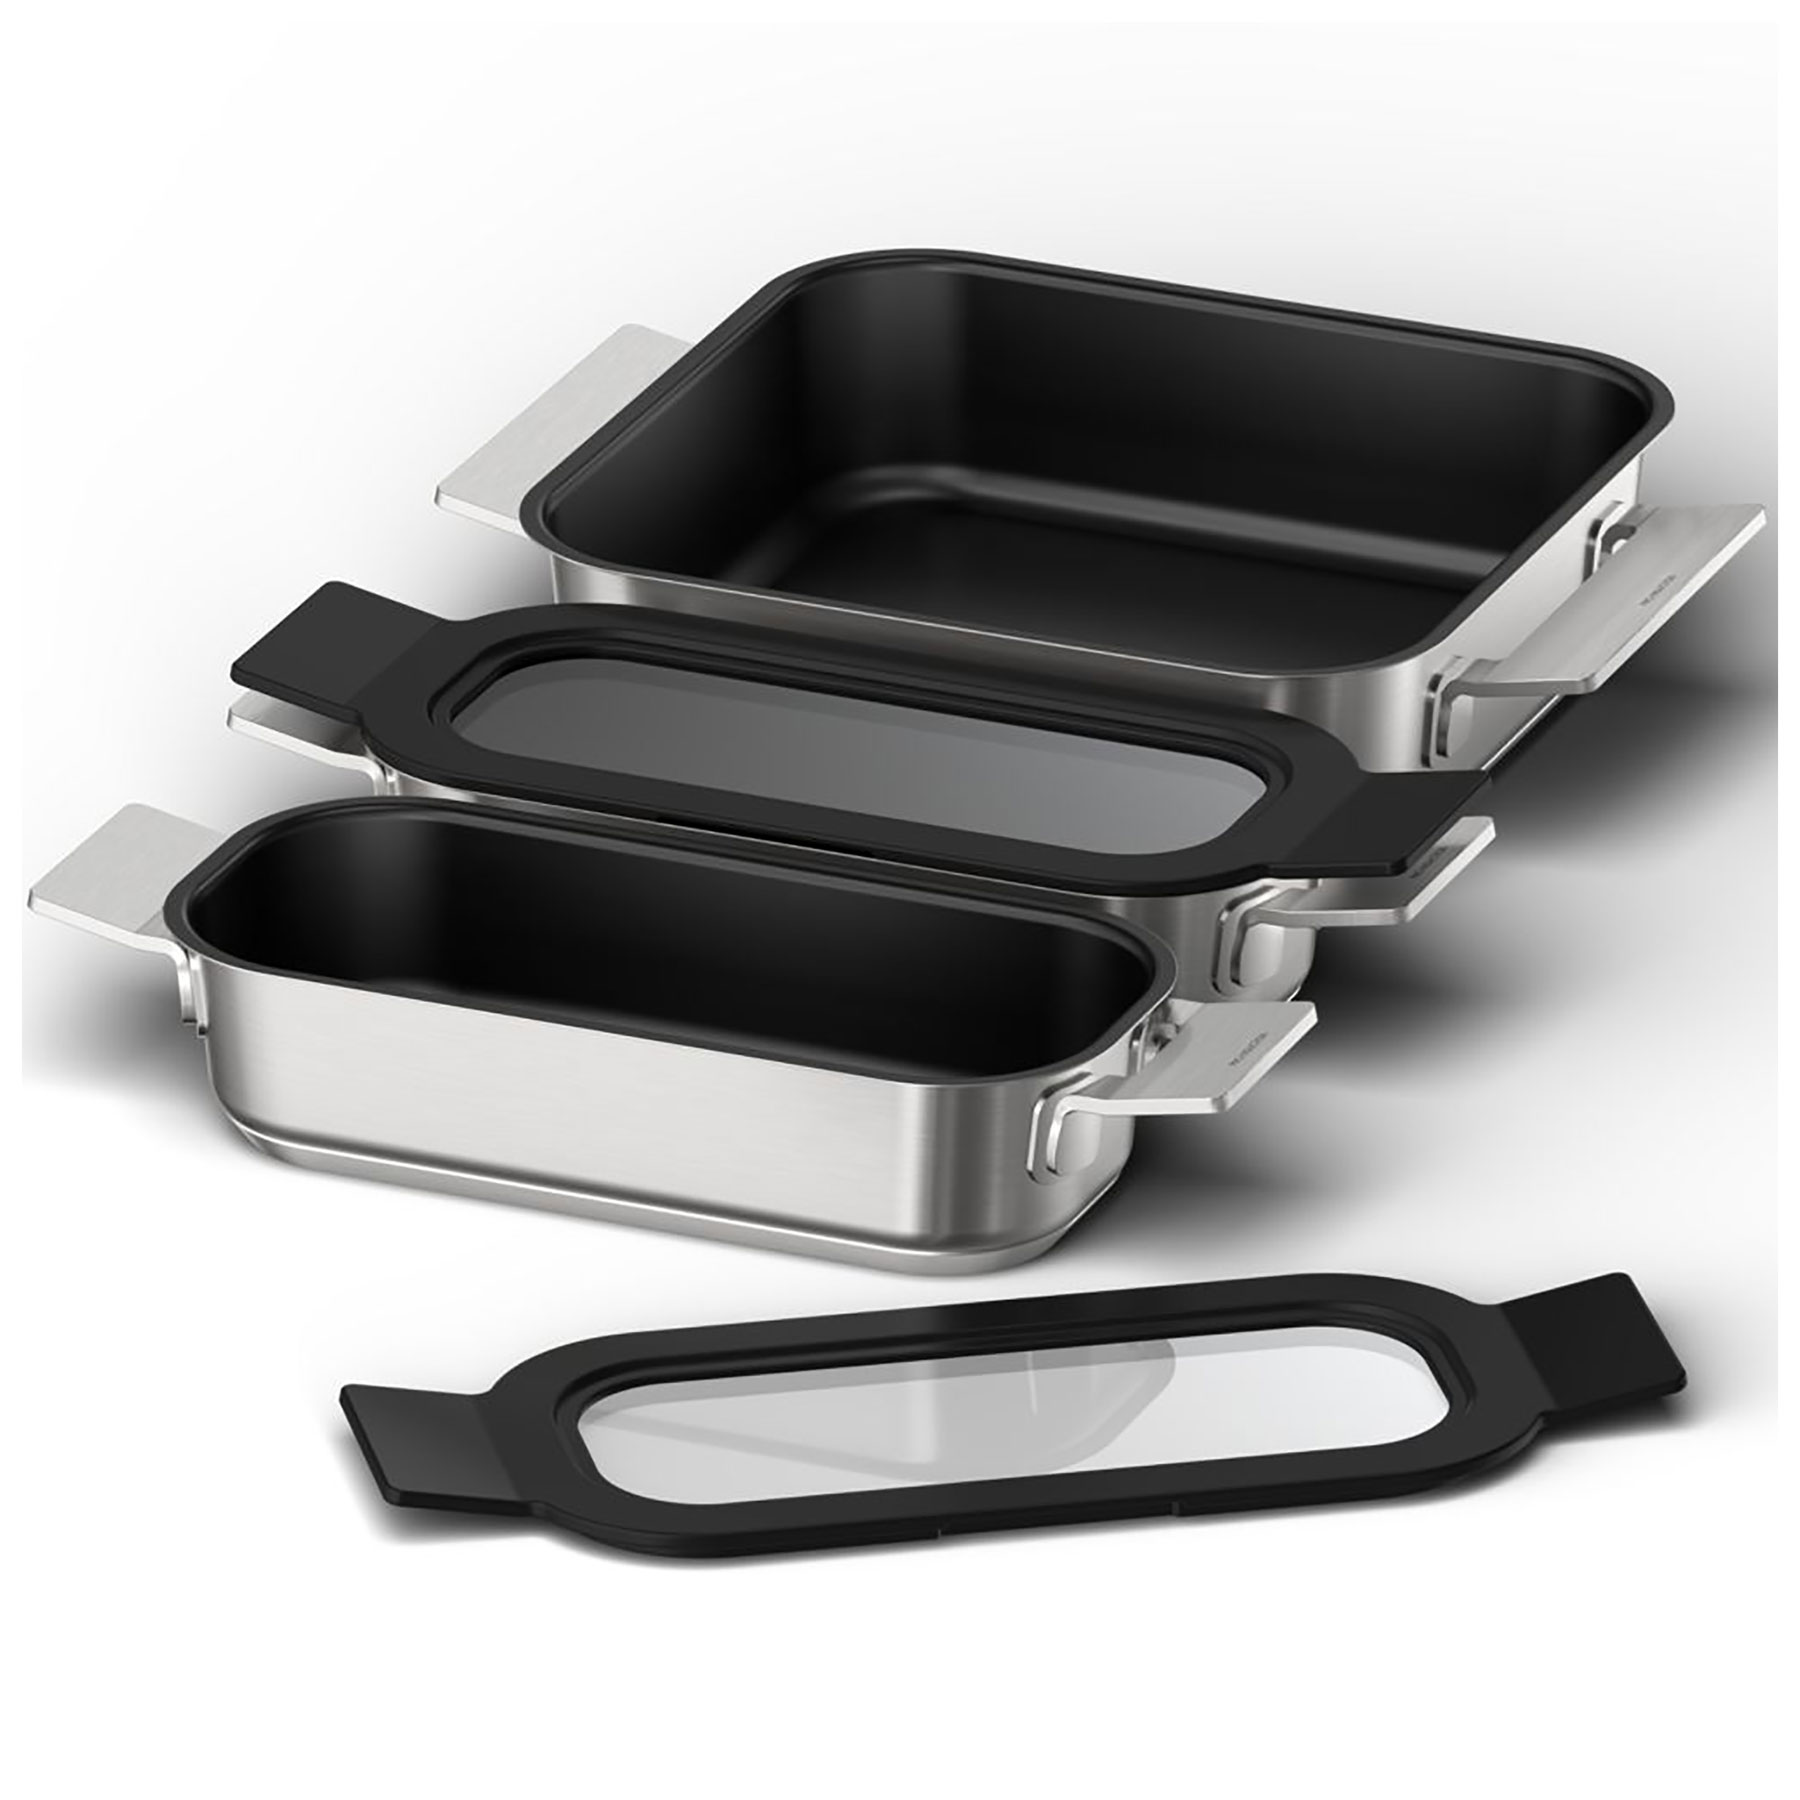 Image of Neff Z9403FF0 3 Piece Induction Flex Pan Set in Stainless Steel